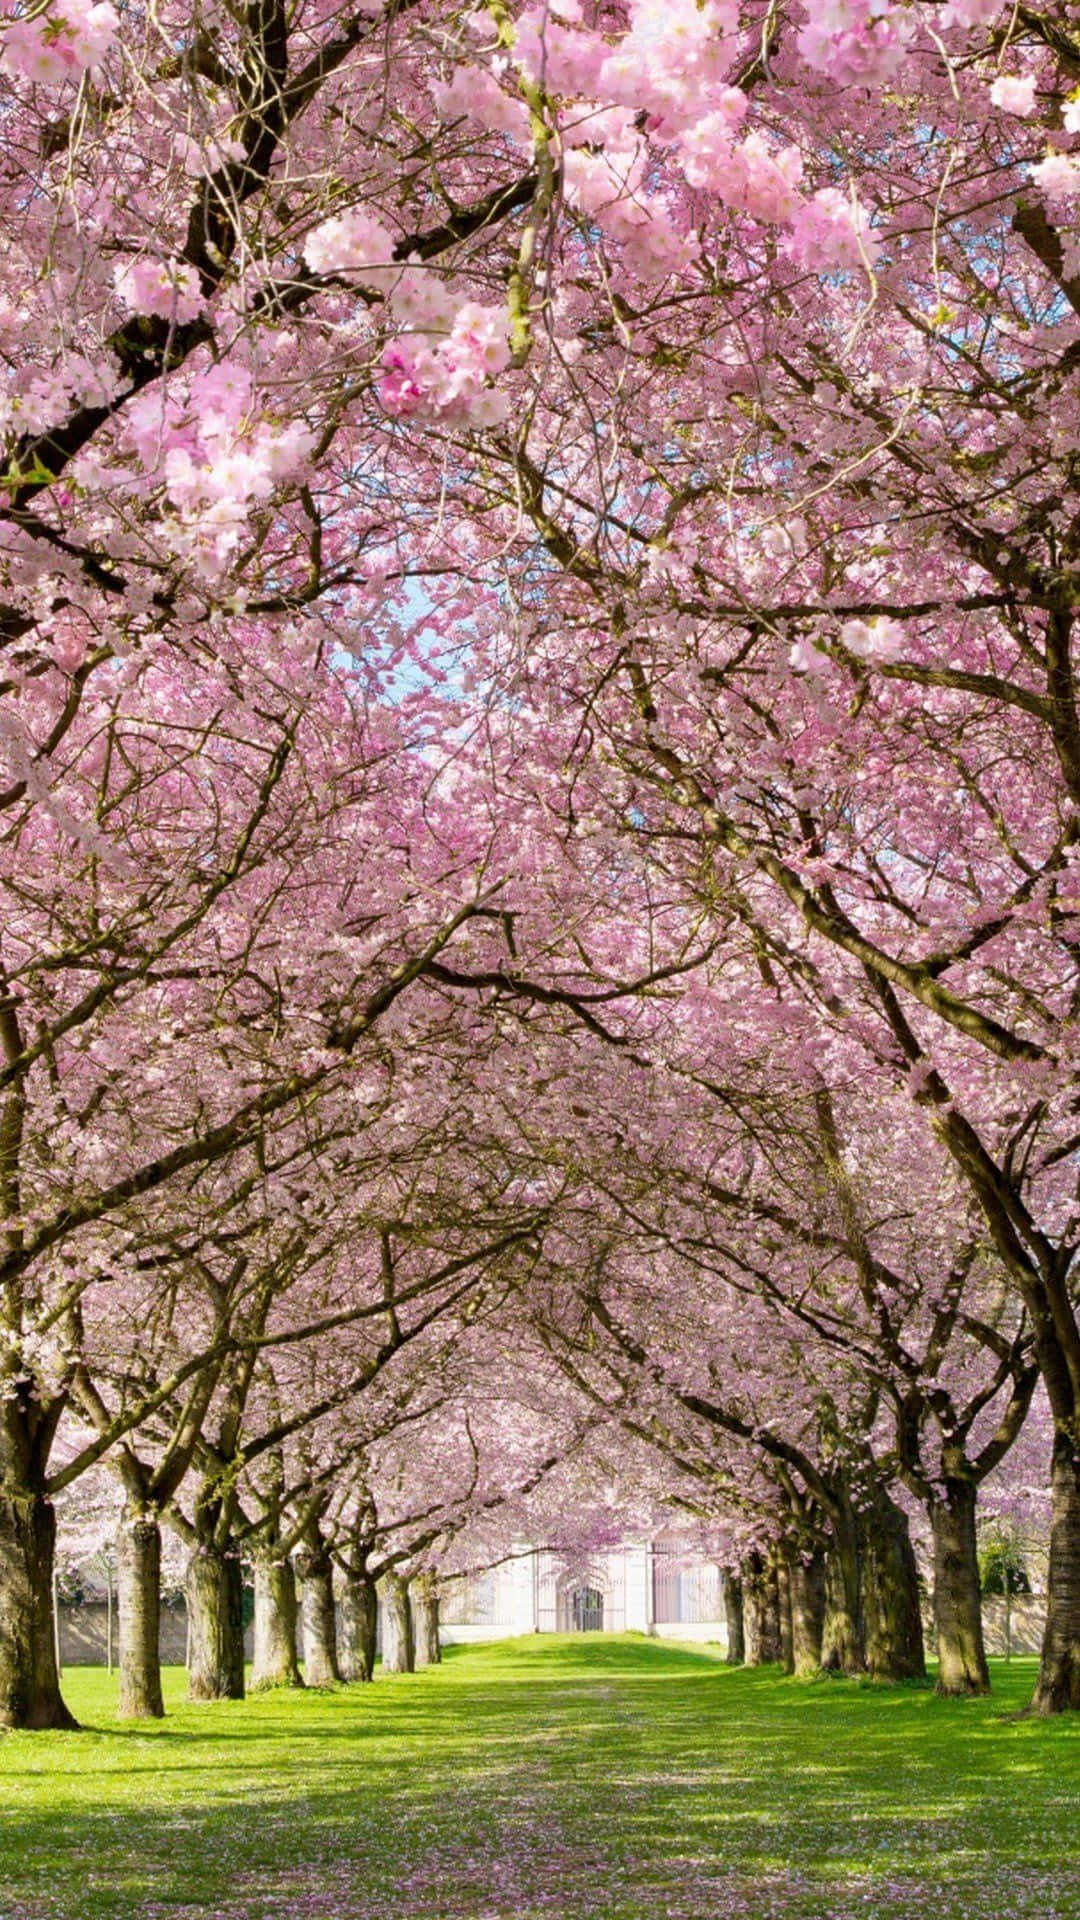 Sunshine and blossoms in full bloom Wallpaper